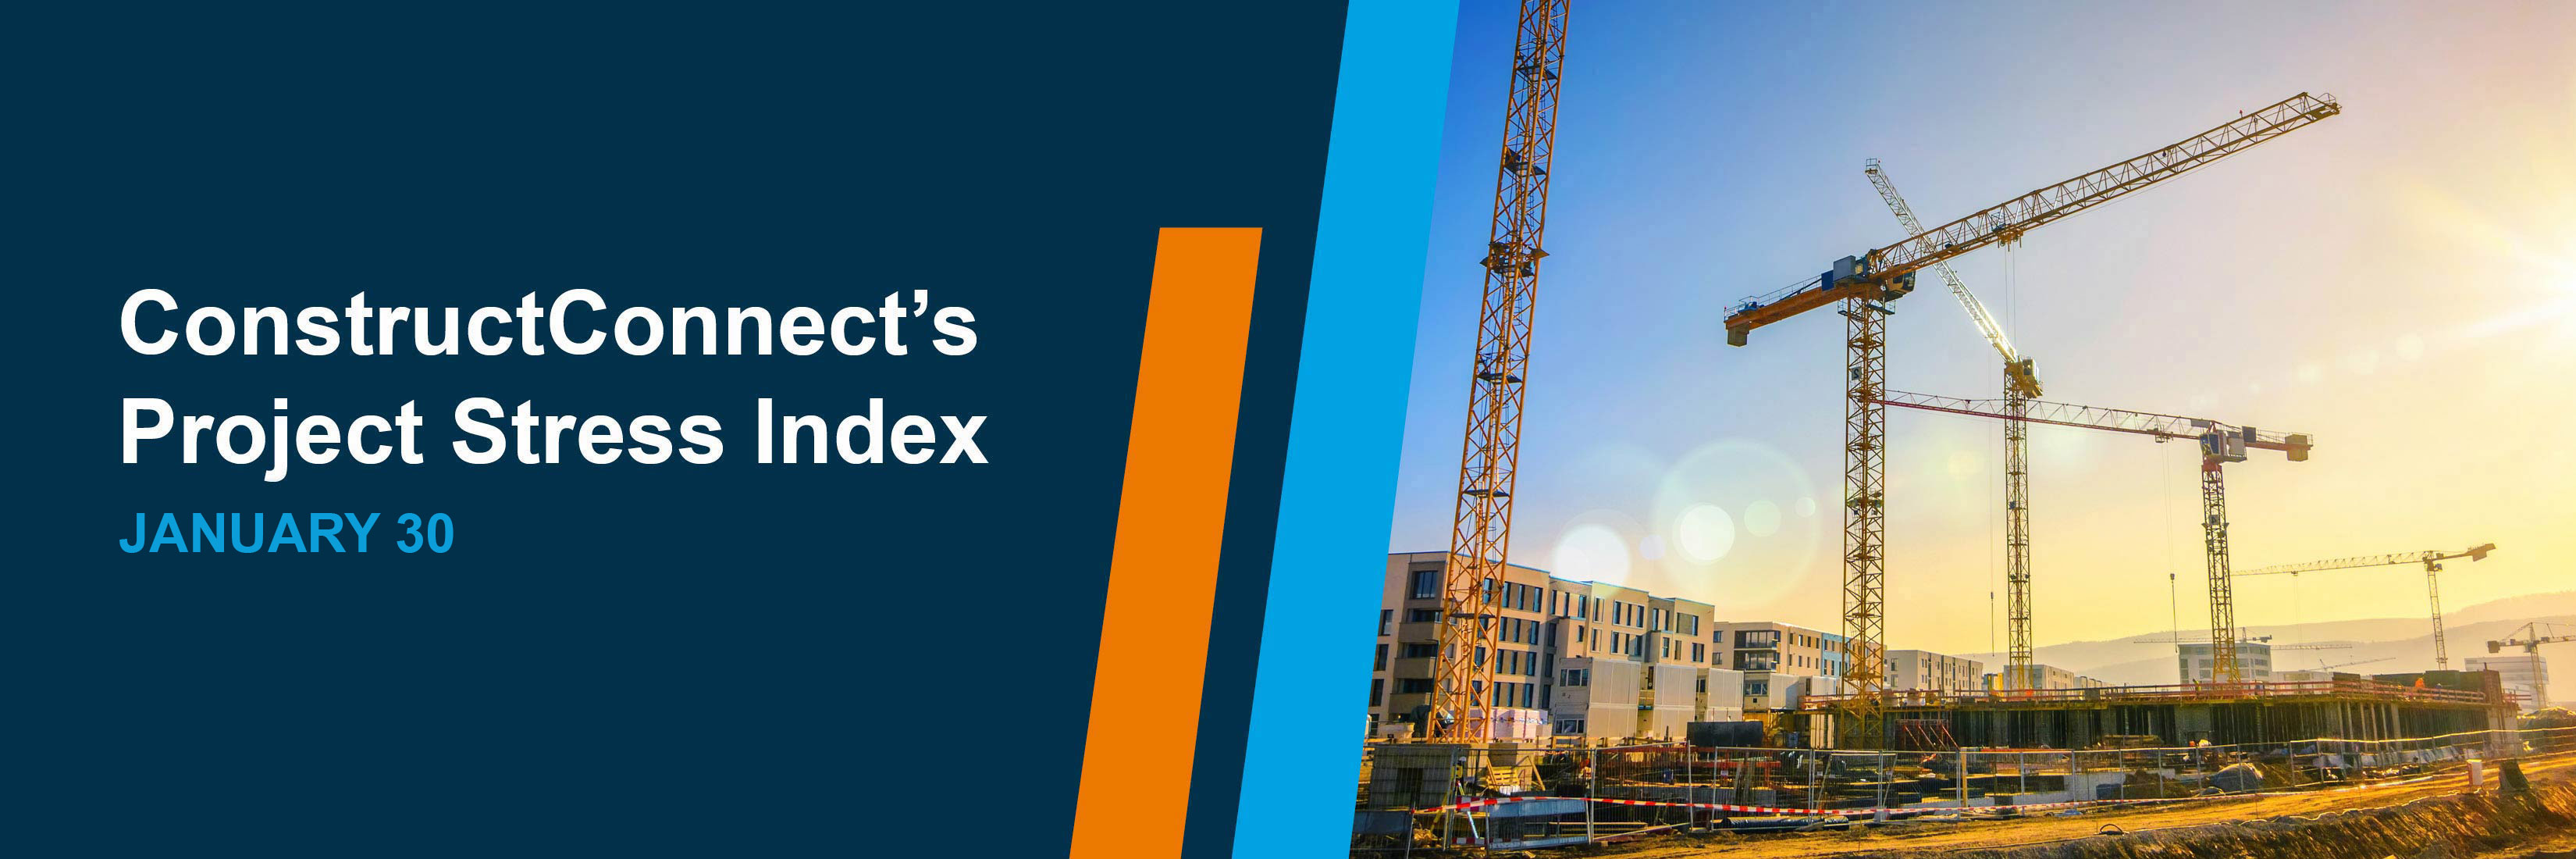 ConstructConnect's Project Stress Index - January 30